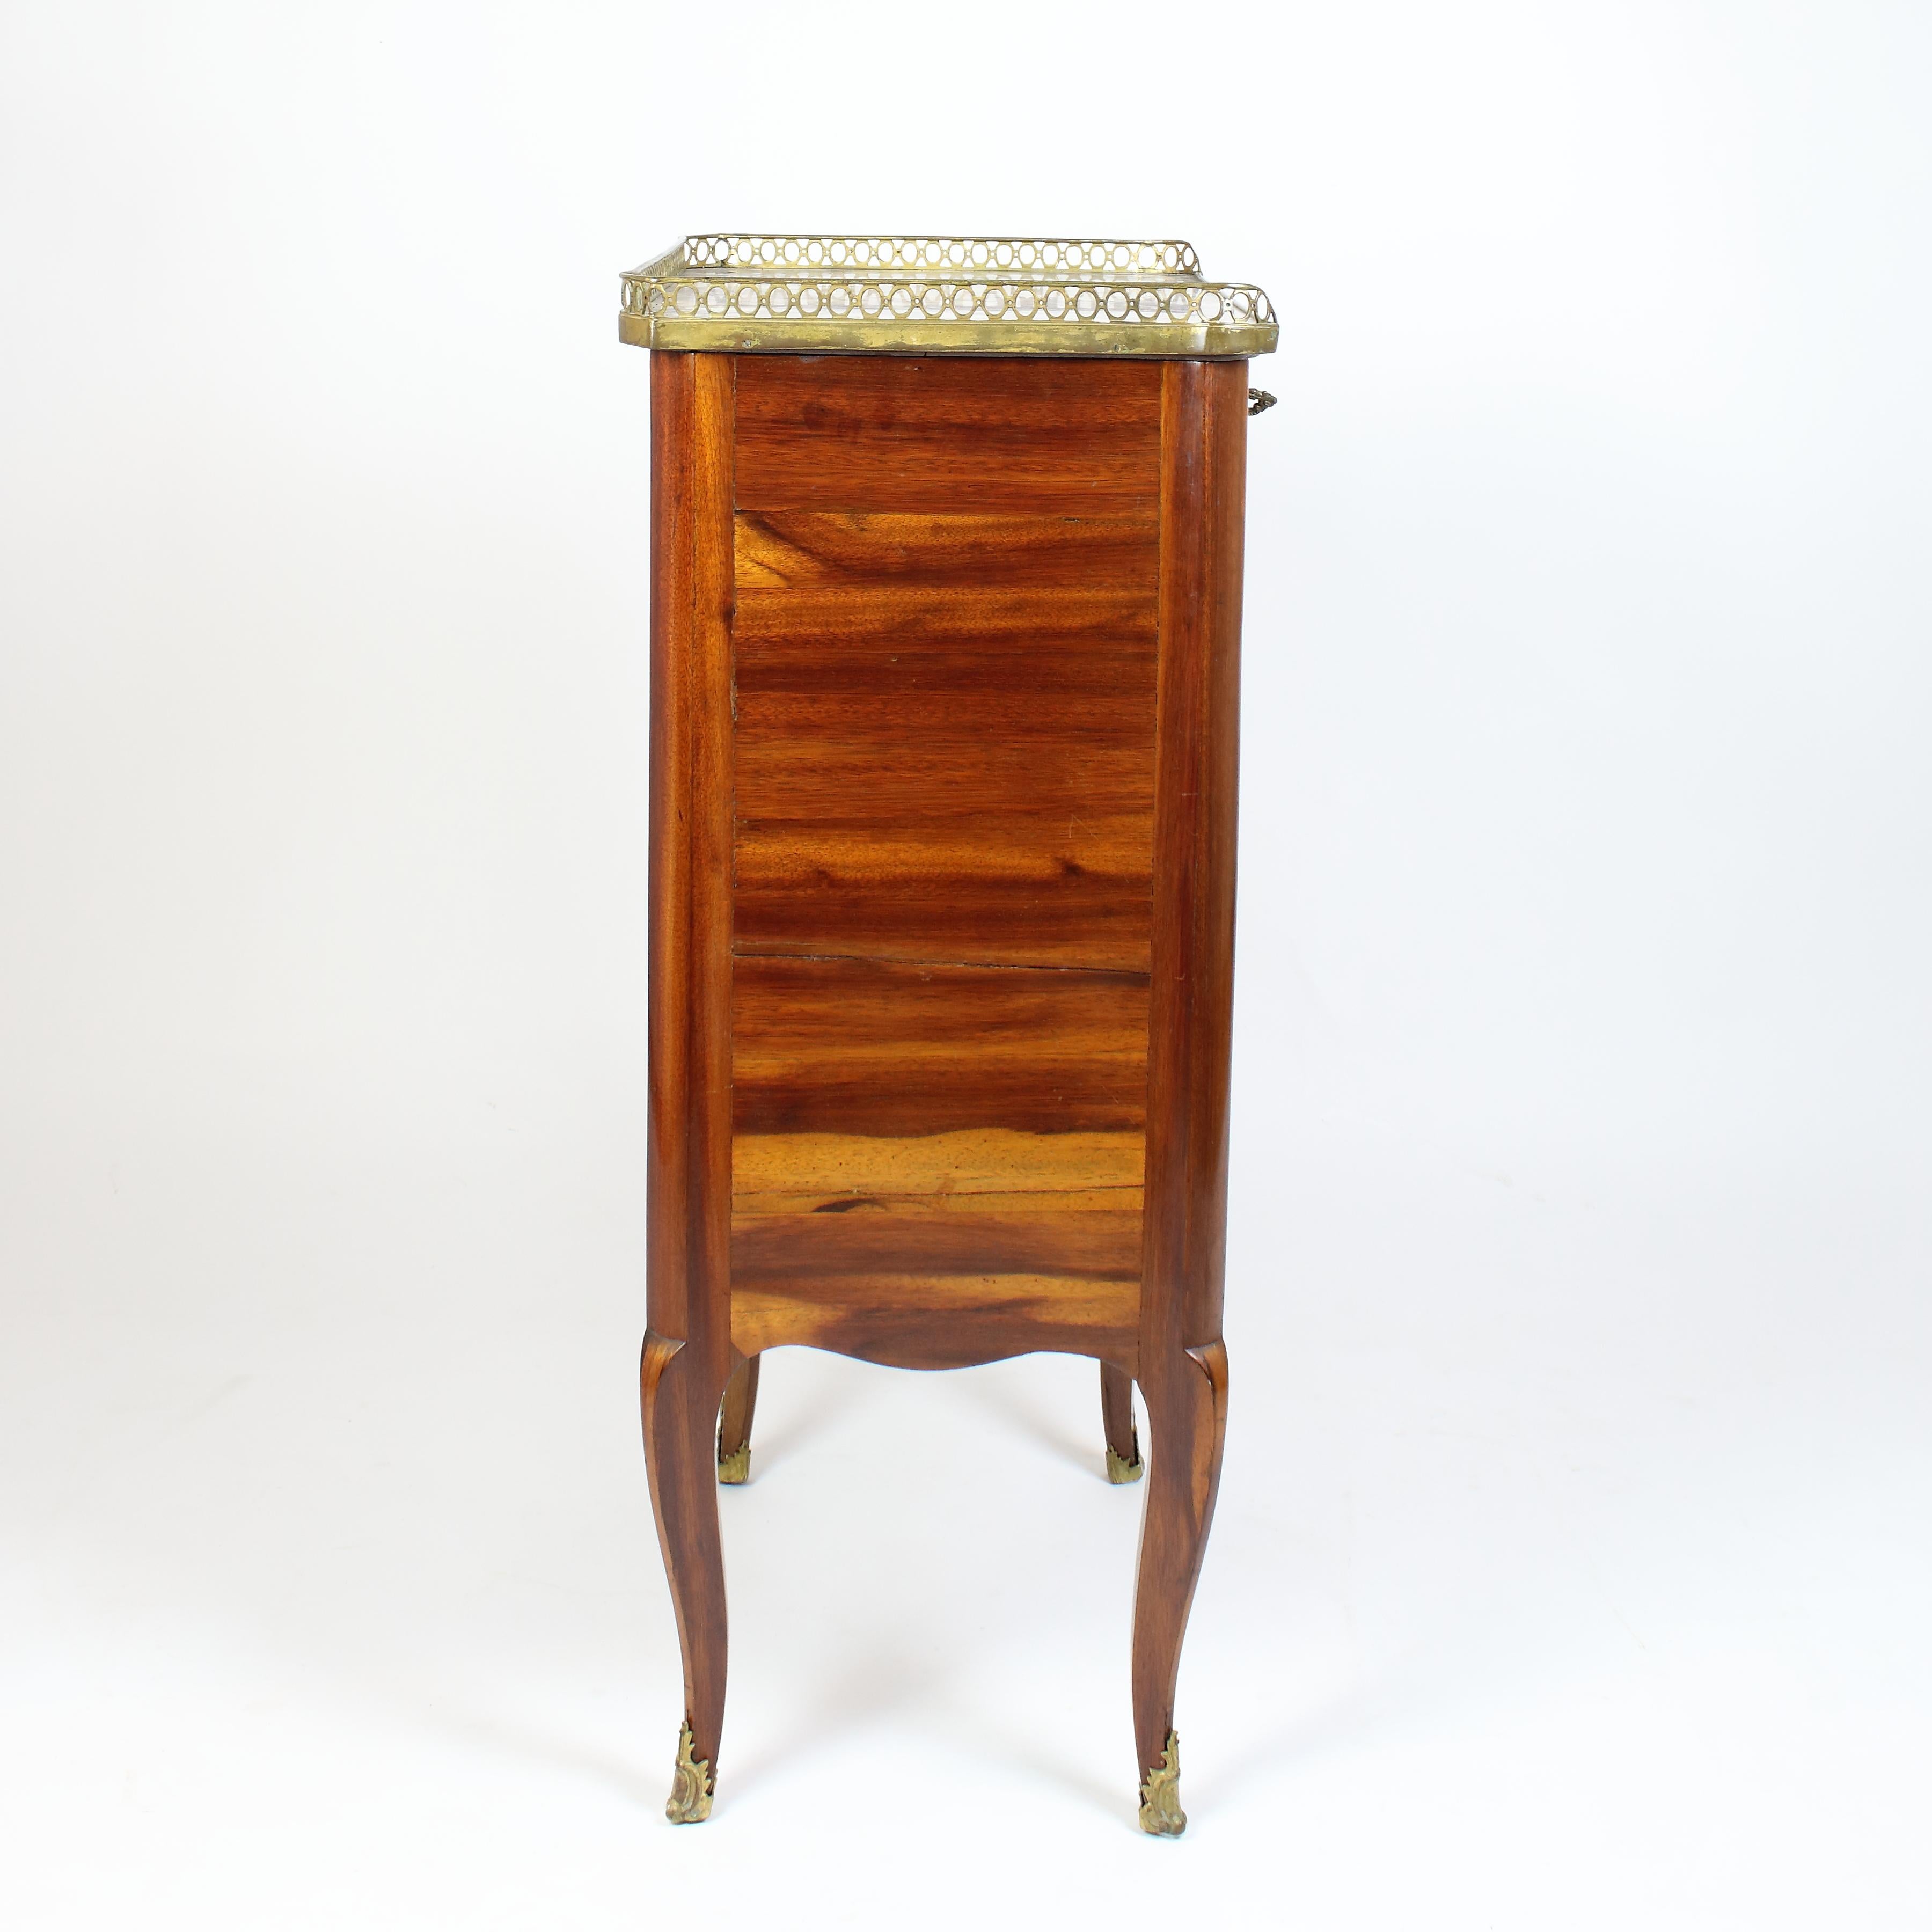 Mid-18th Century 18th Century French Transition Louis XVI Small Writing Cabinet Meuble Ecritoire For Sale